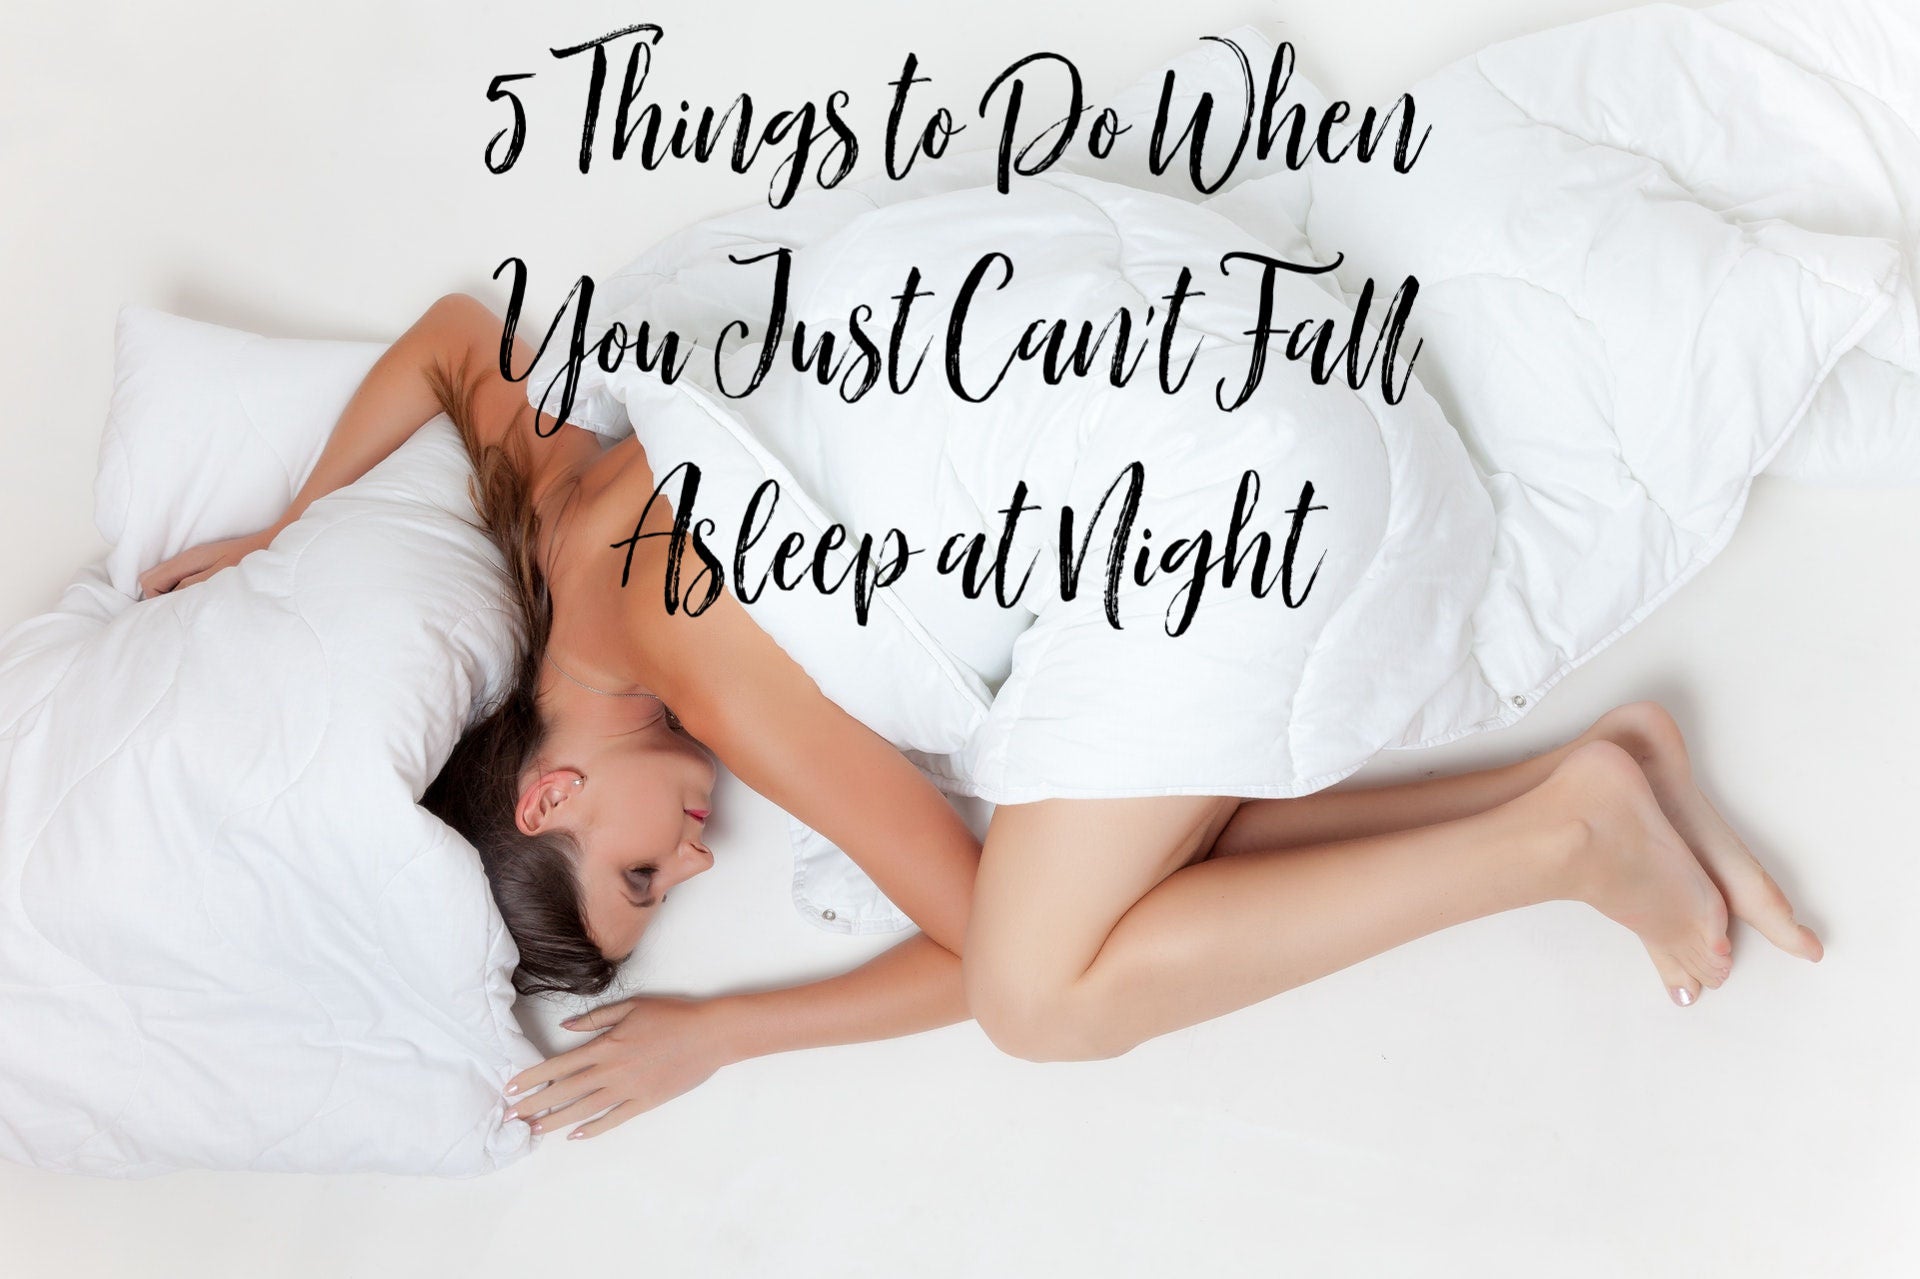 5 things to do when you can't sleep at night